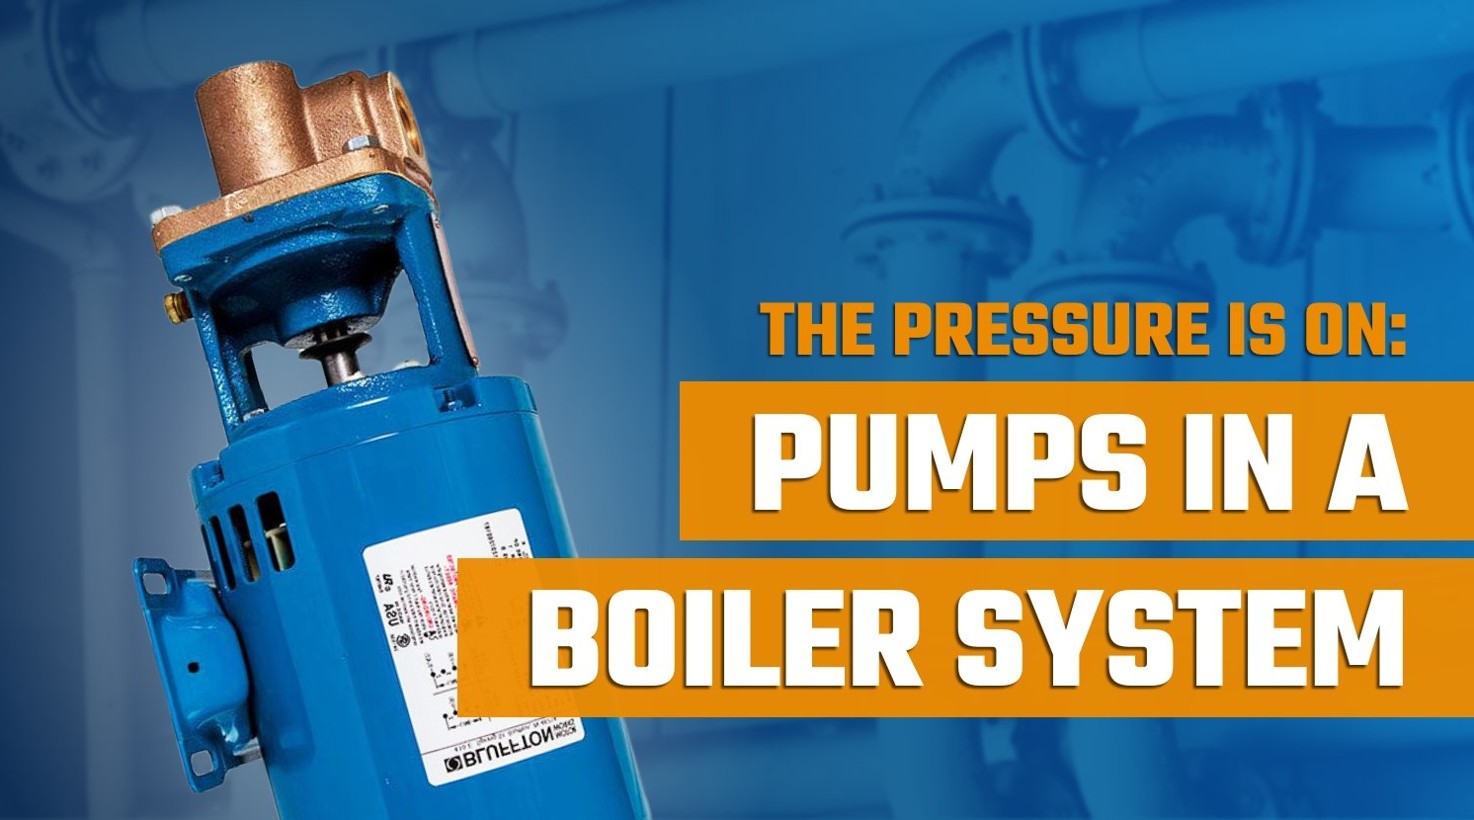 The Pressure Is On: Pumps in a Boiler System